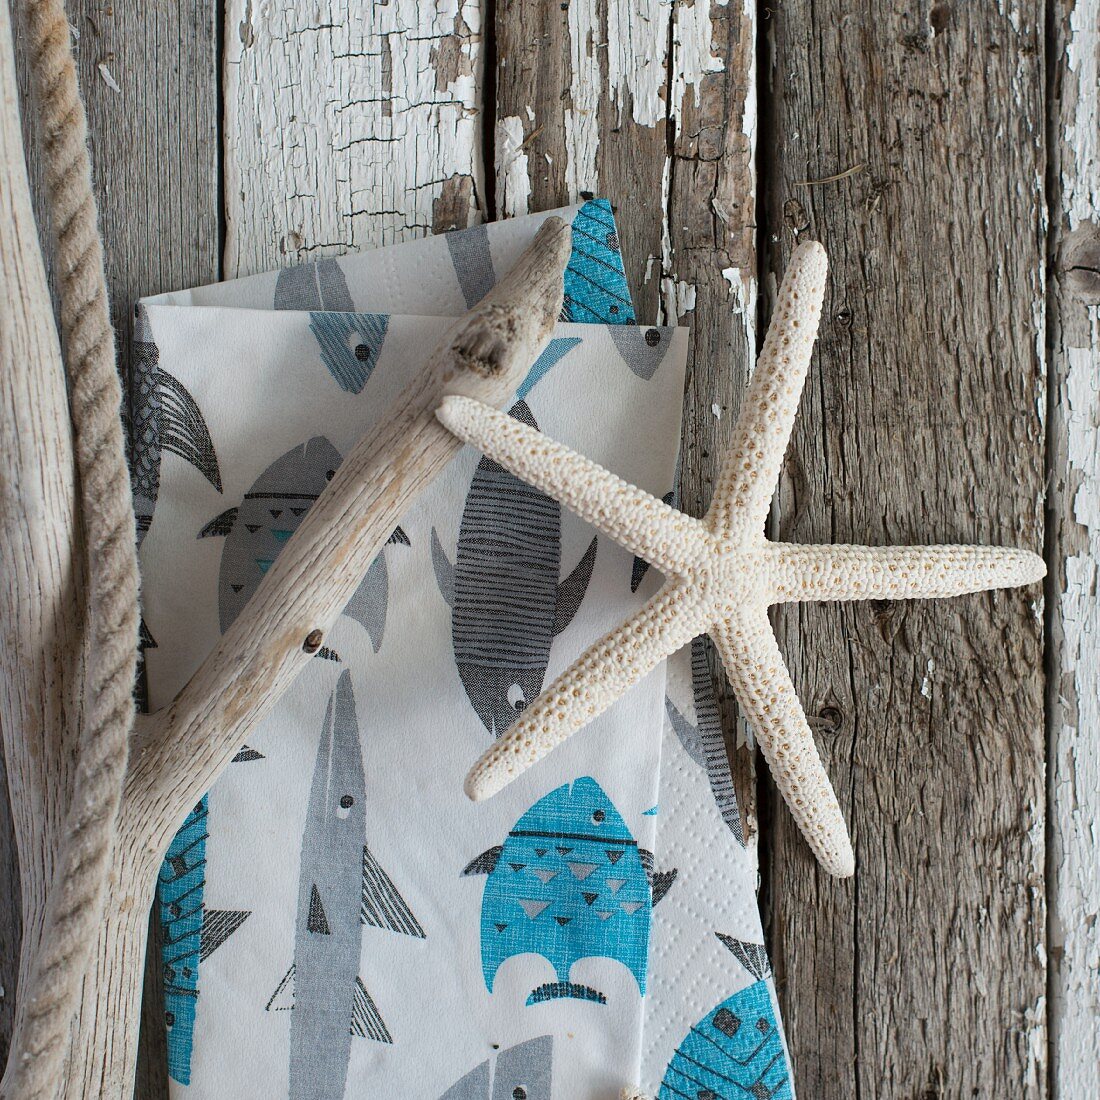 Dried starfish, driftwood & napkin with maritime print on weathered wooden surface